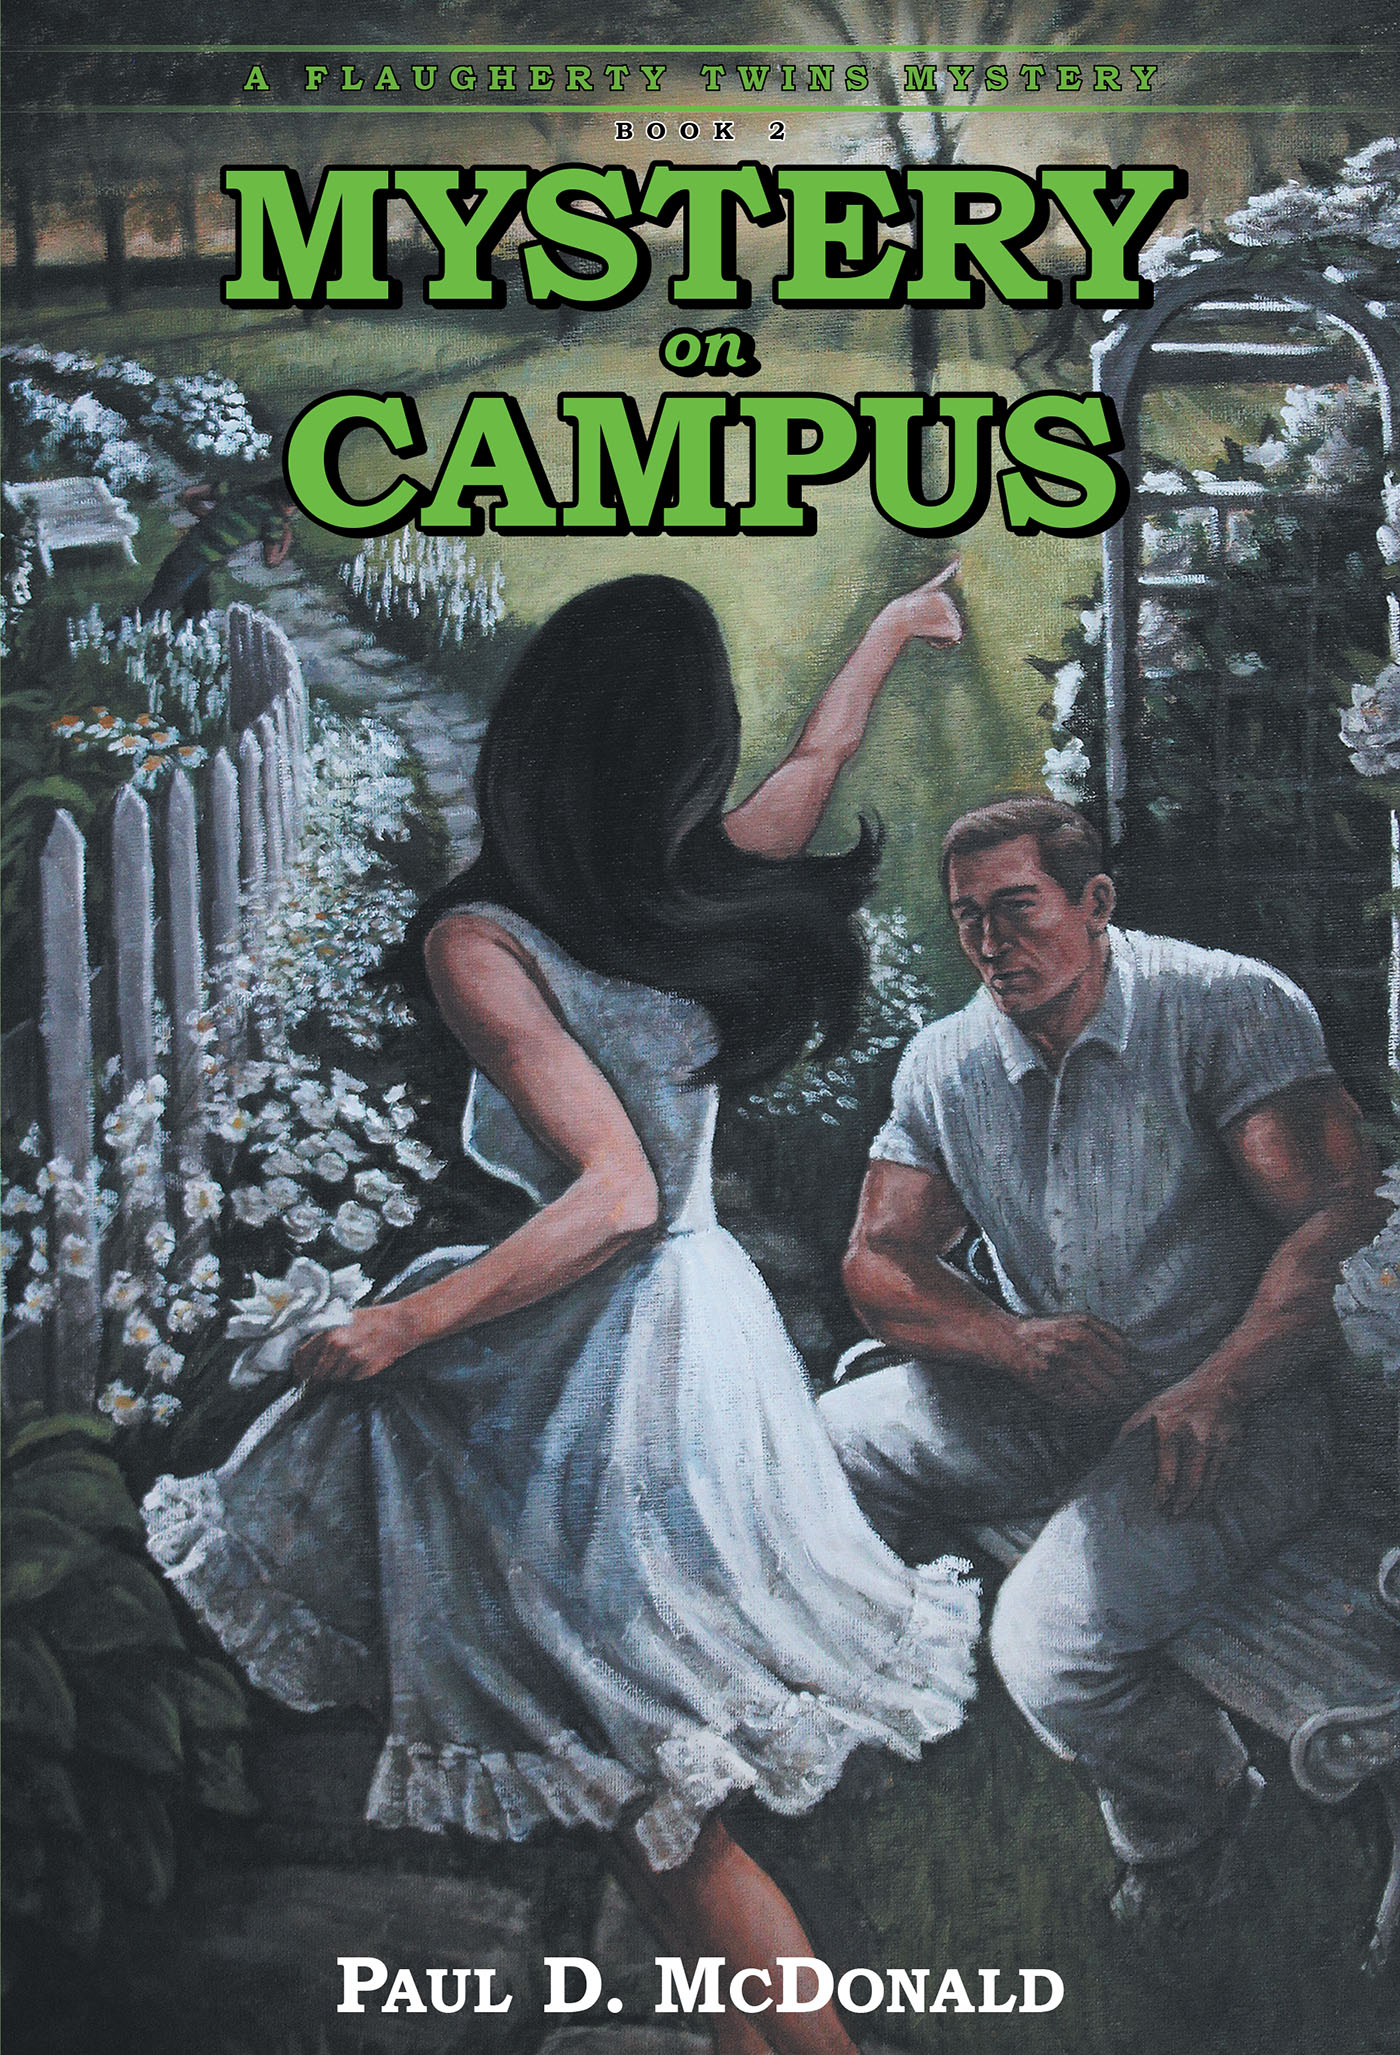 Paul D. McDonald’s New Book, "Mystery on Campus: A Flaugherty Twins Mystery—Book 2" is a Thrilling Tale That Leads to Decades-Old Secrets and a Mystifying Murder Case